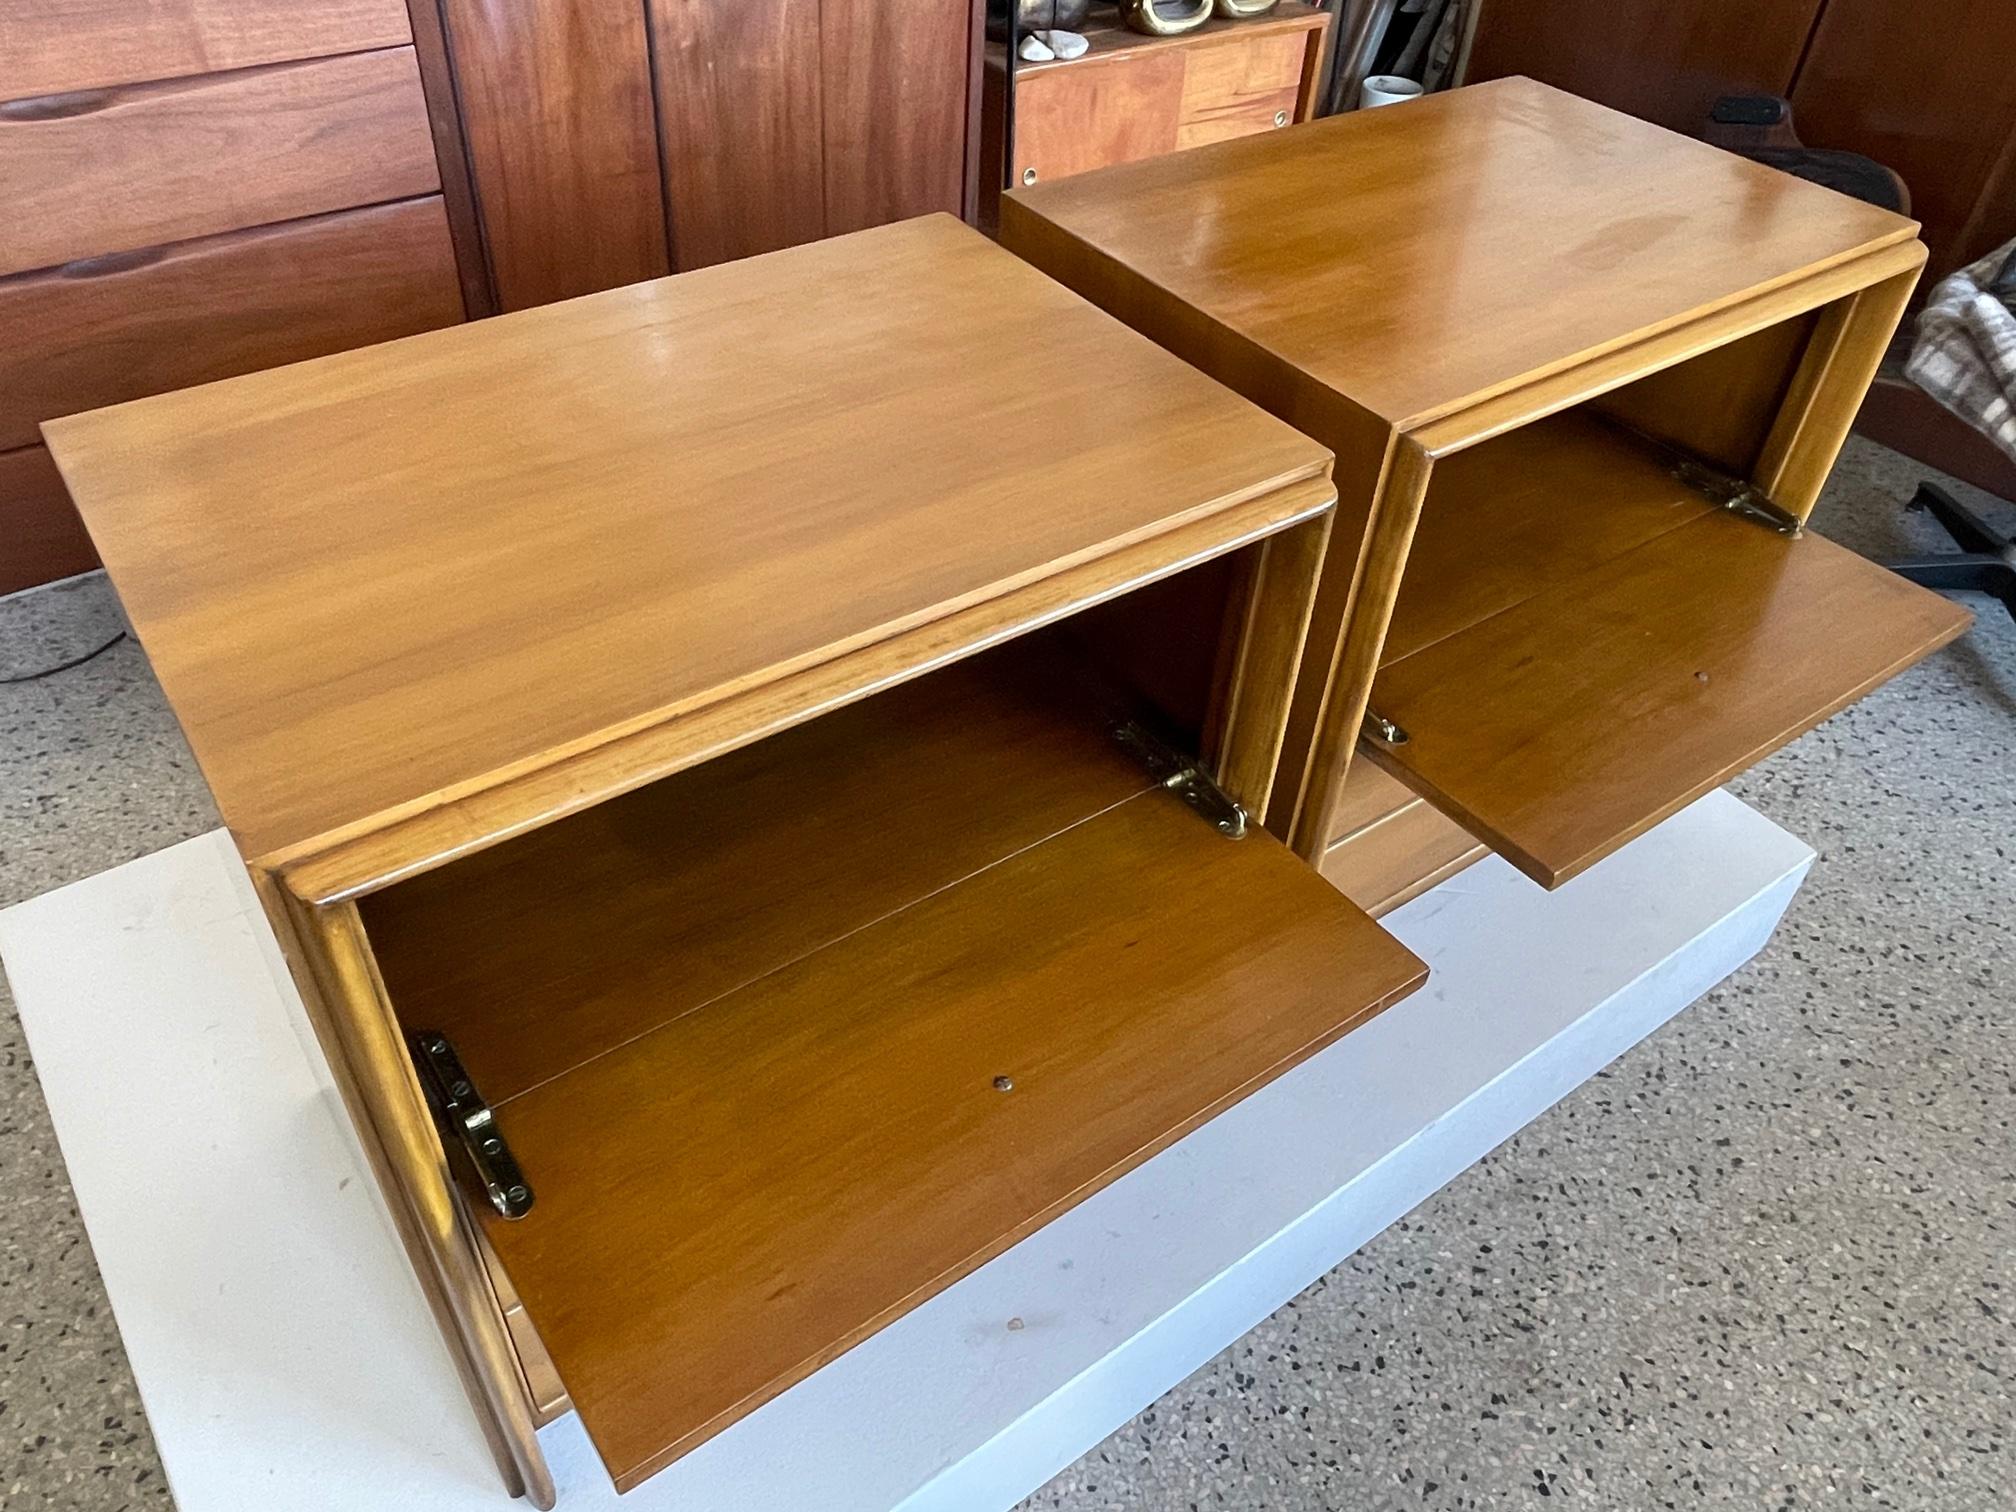 A pair of classic nightstands designed by Paul Frankl for John Stuart, ca' 1950's. Nickeled X handles, drop down fronts with 2 drawers below. Original finish in very good condition.